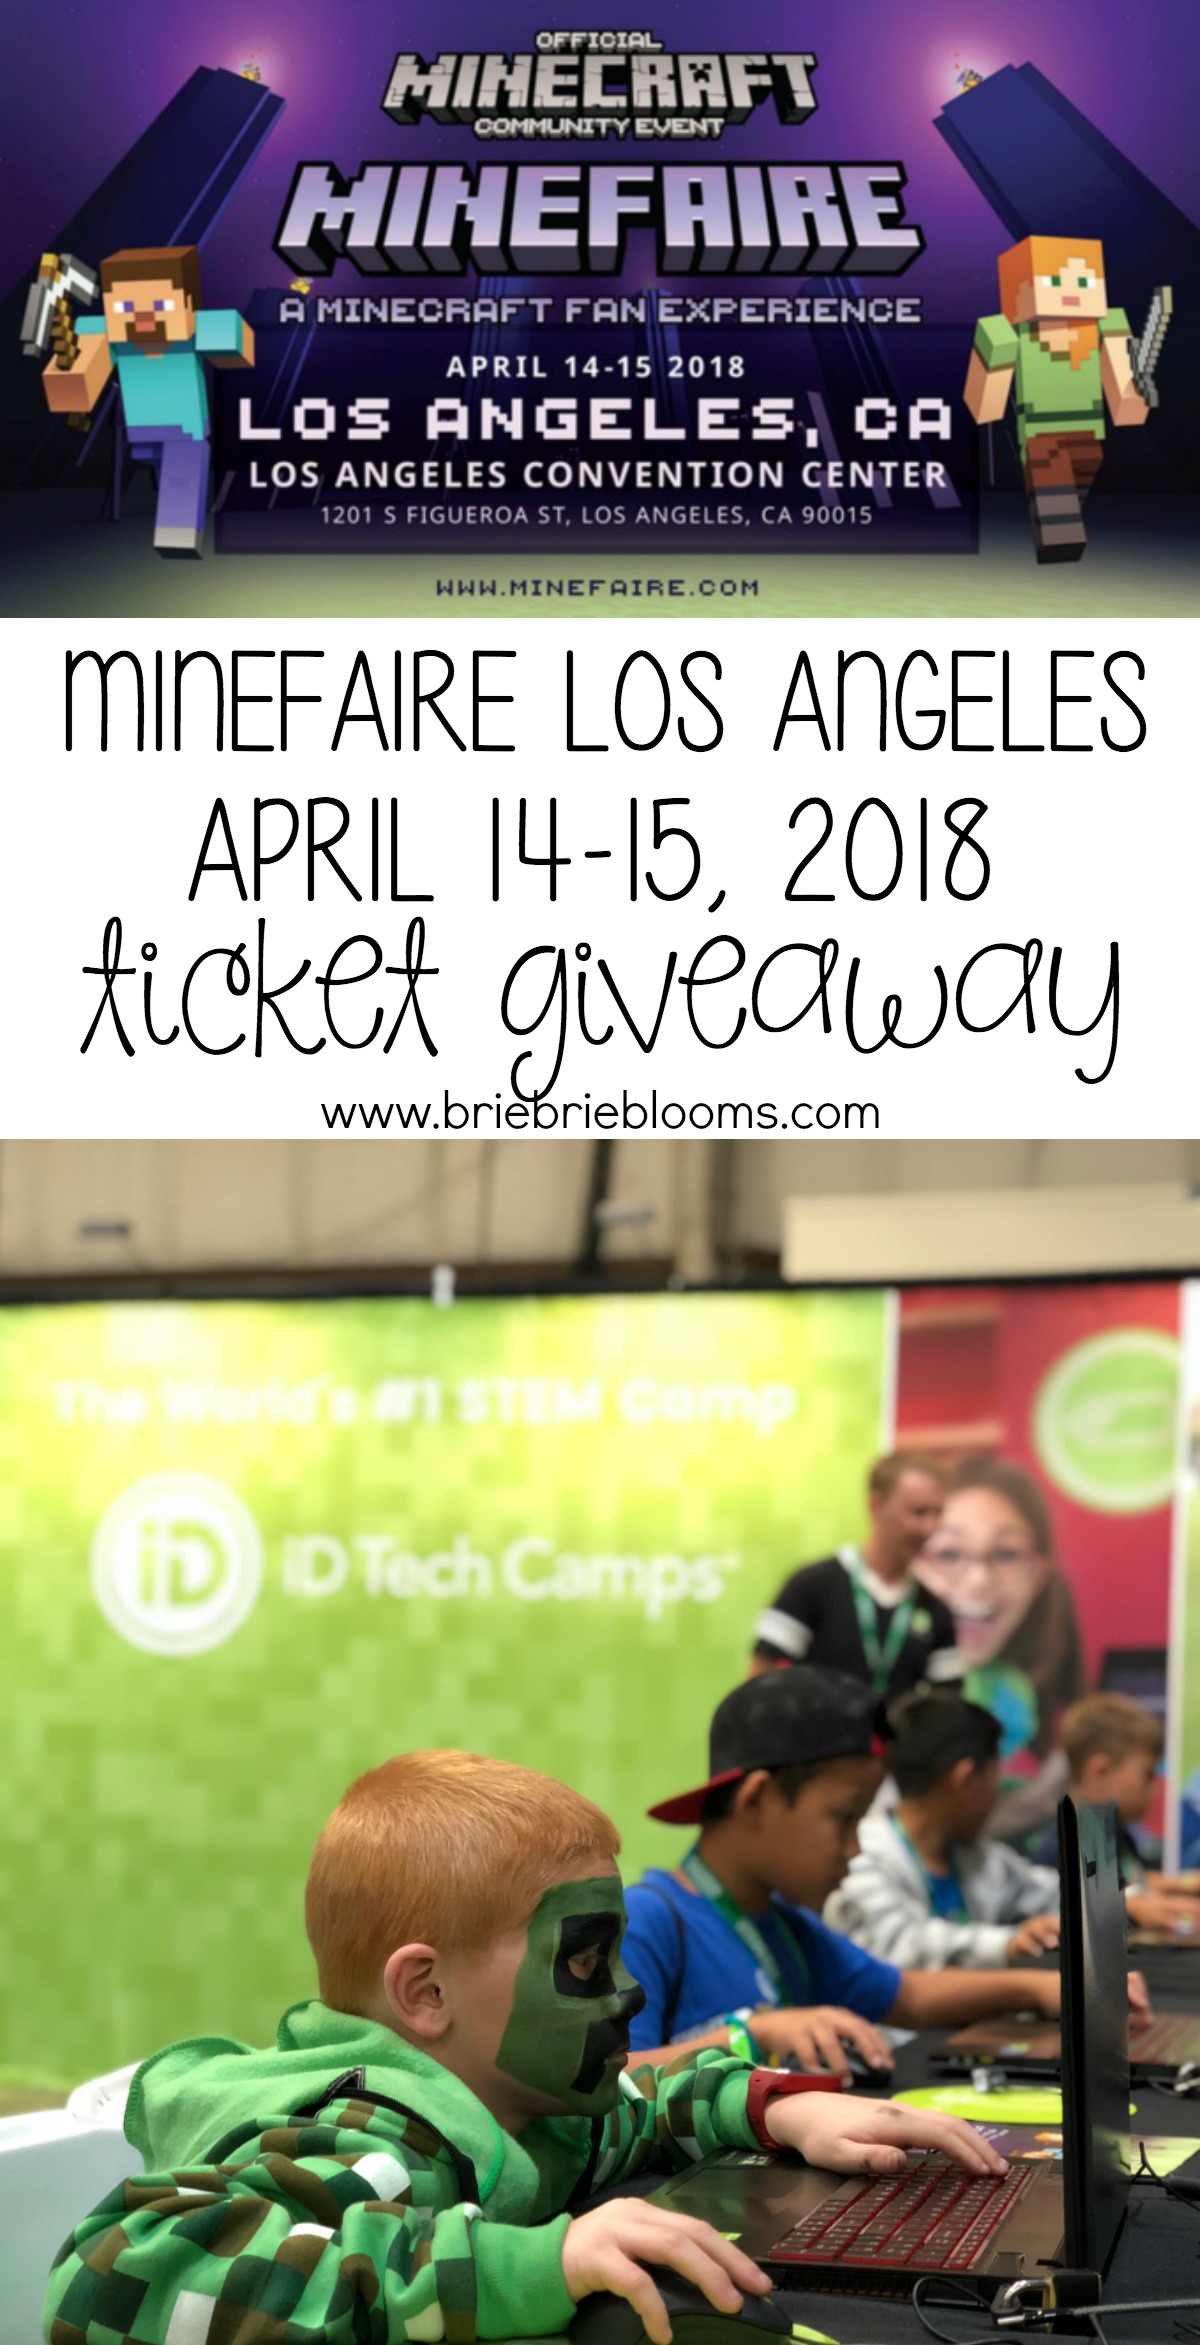 Enter to win four Minefaire Los Angeles tickets to attend the ultimate Minecraft fan experience April 15-15, 2018!